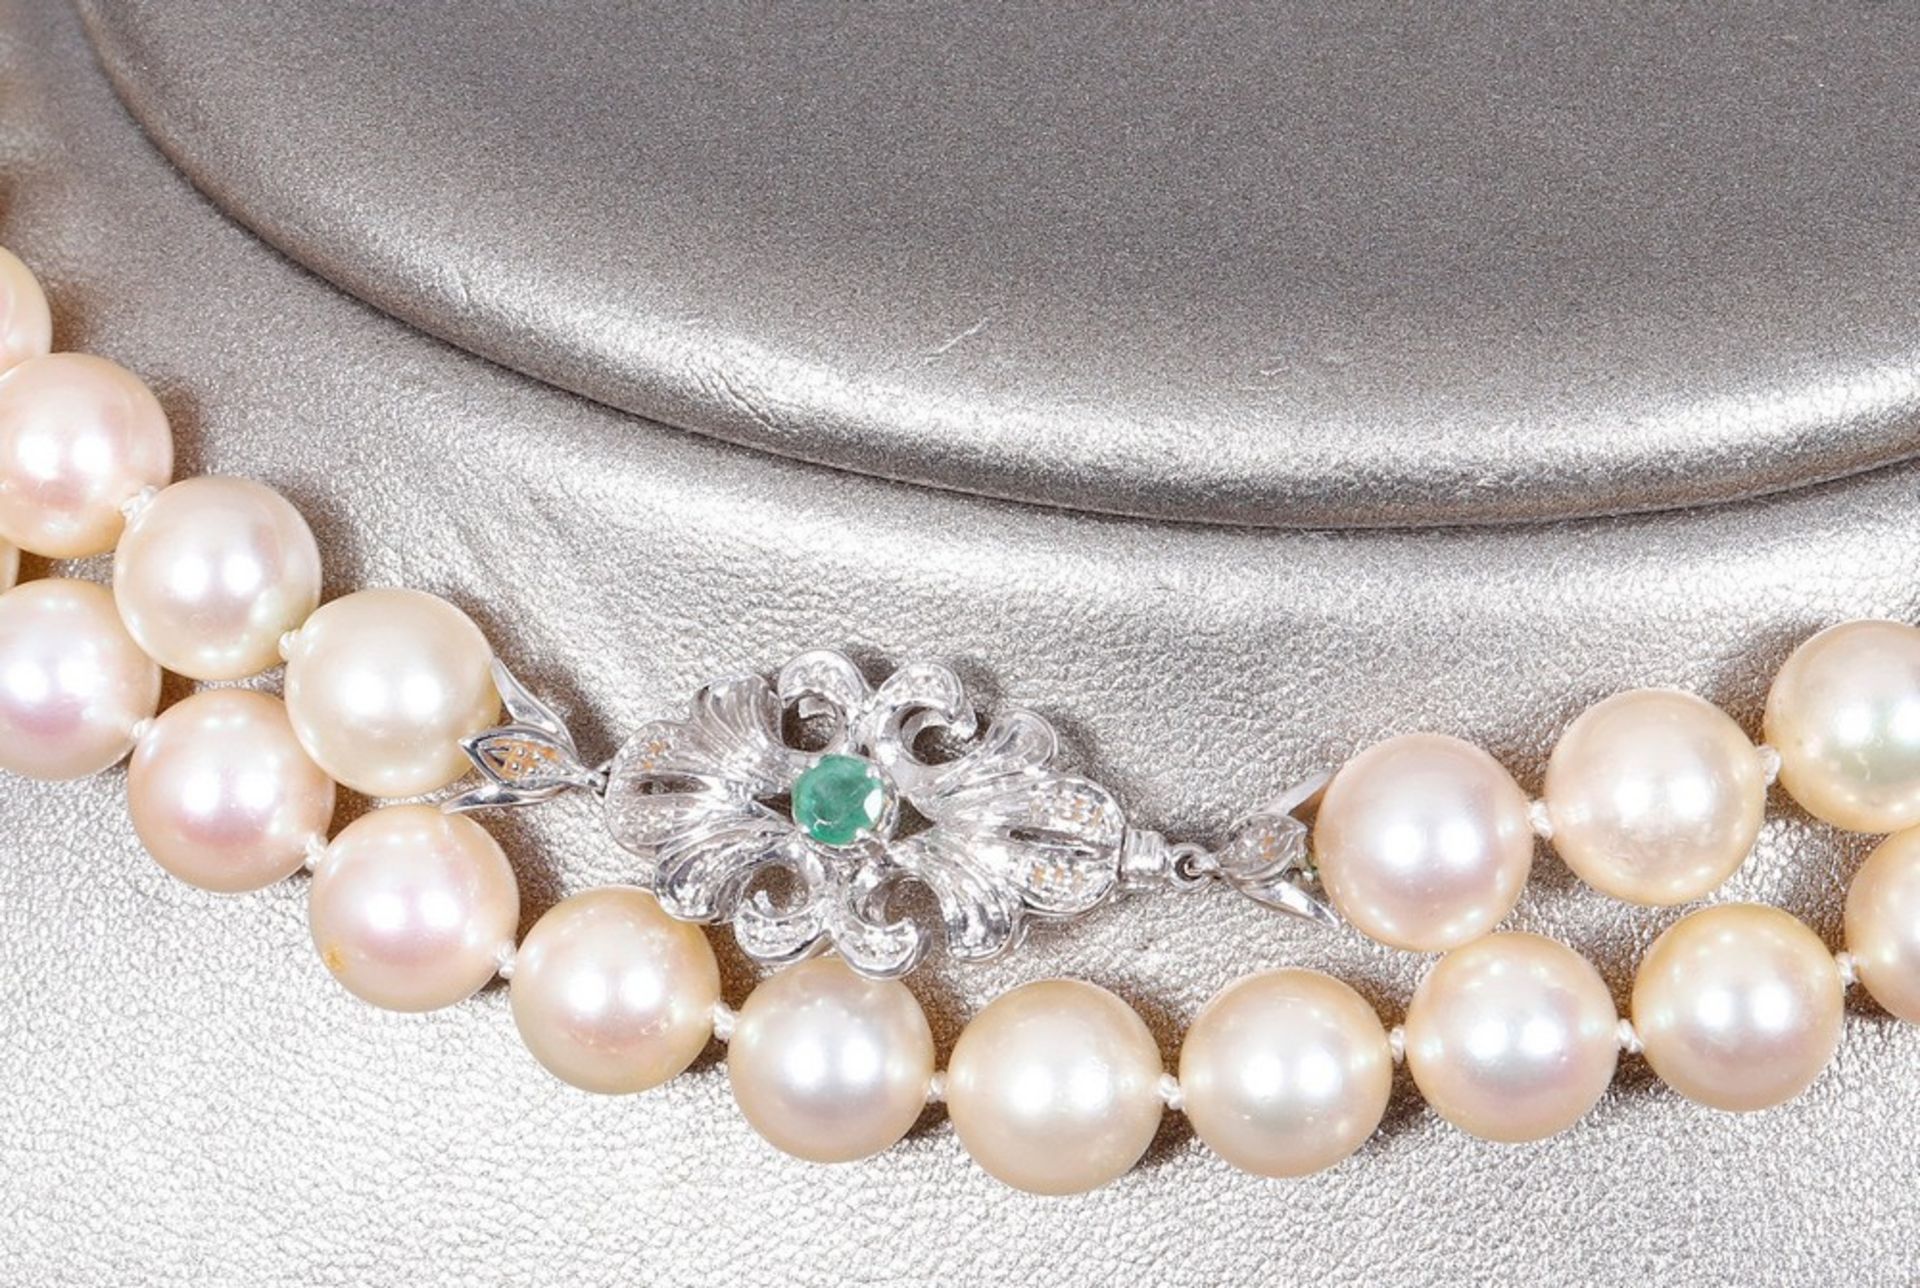 Pearl necklace, 750 white gold clasp, Italy, mid 20th C. - Image 3 of 4